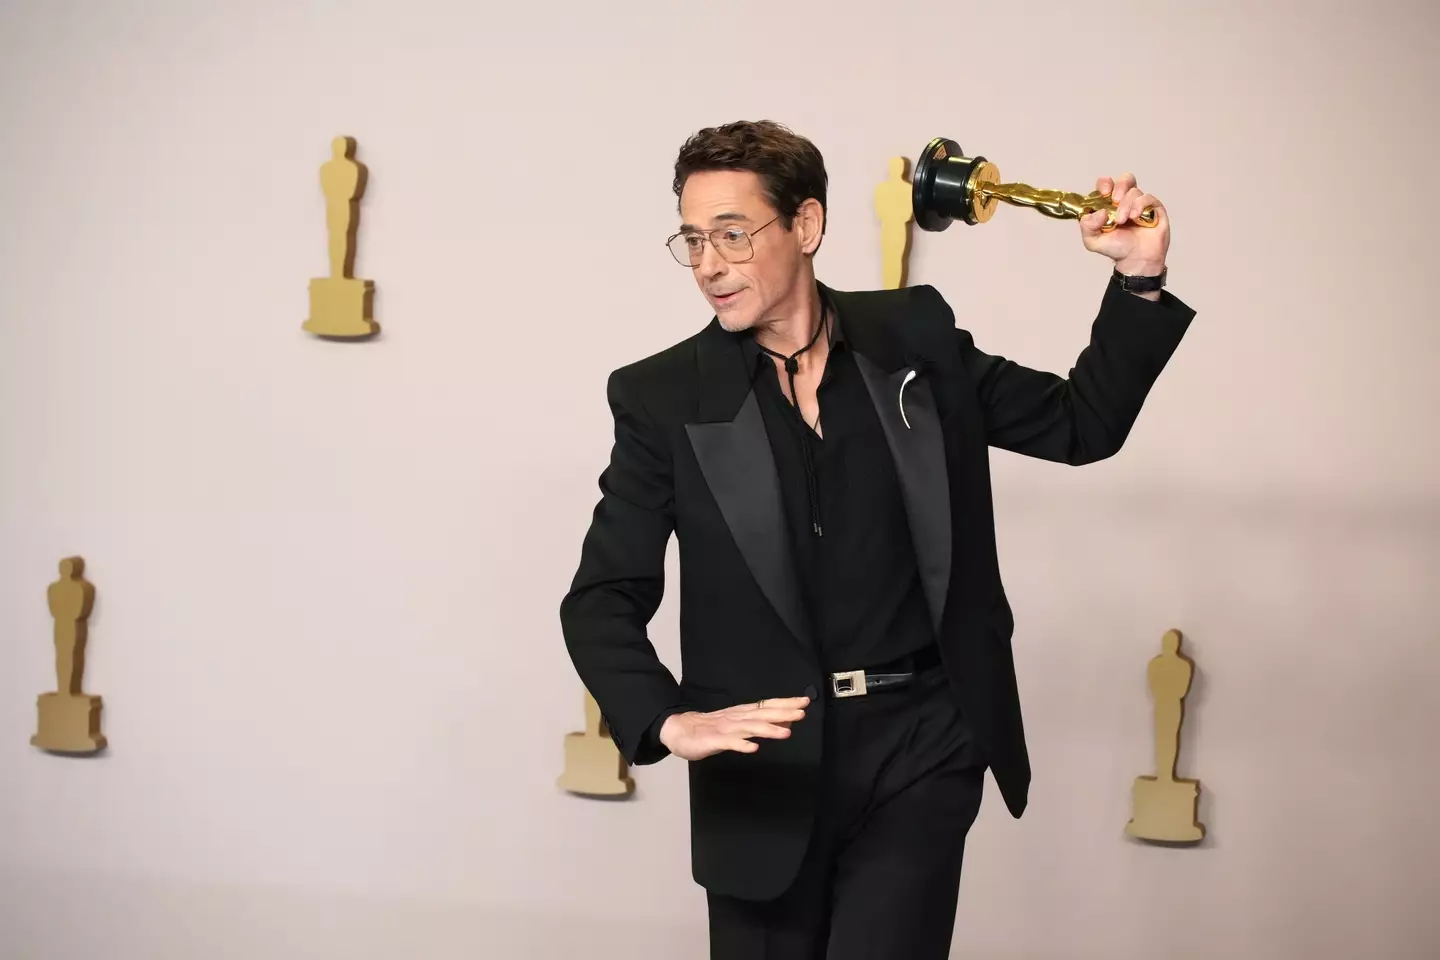 Robert Downey Jr. won Best Supporting Actor at the Oscars.